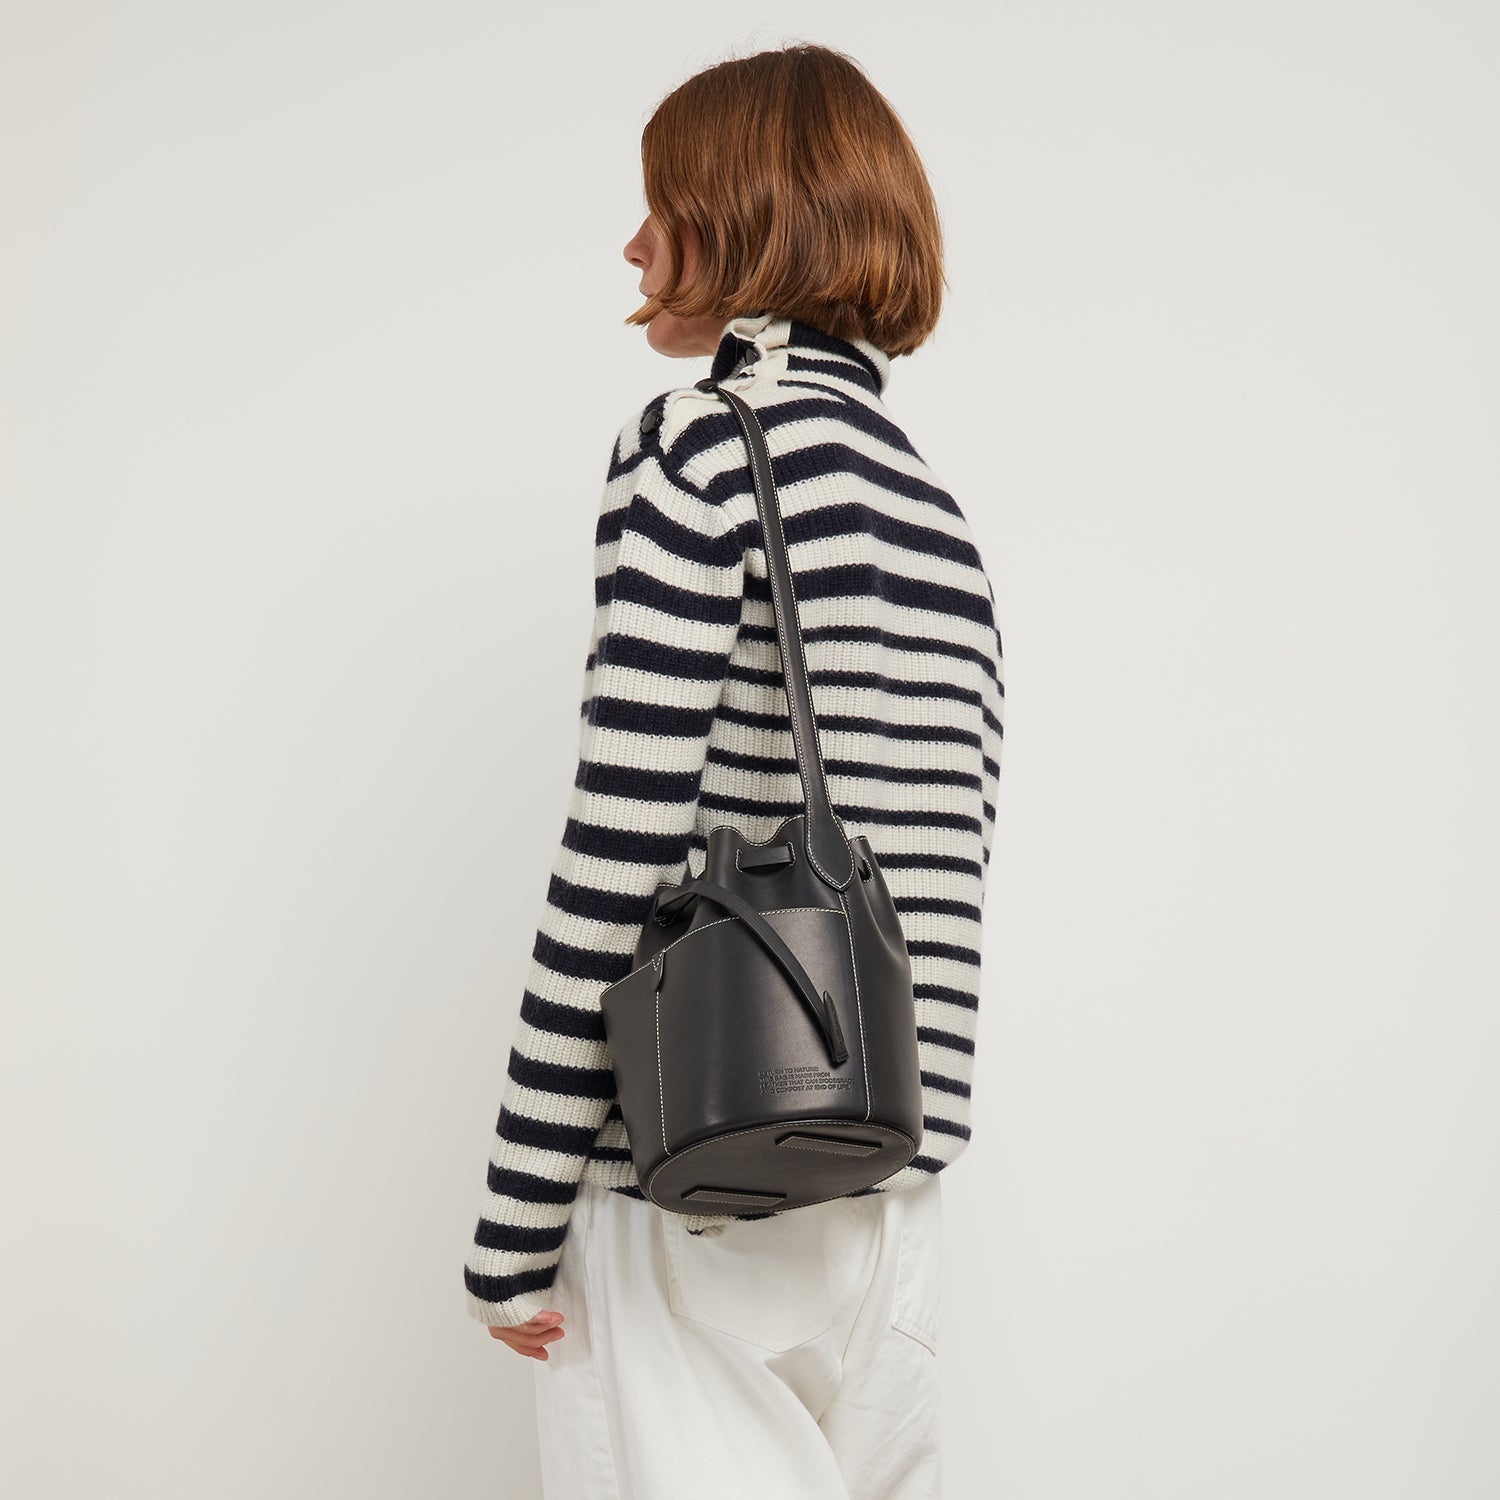 Return to Nature Small Bucket Bag -

                  
                    Compostable Leather in Black -
                  

                  Anya Hindmarch EU
